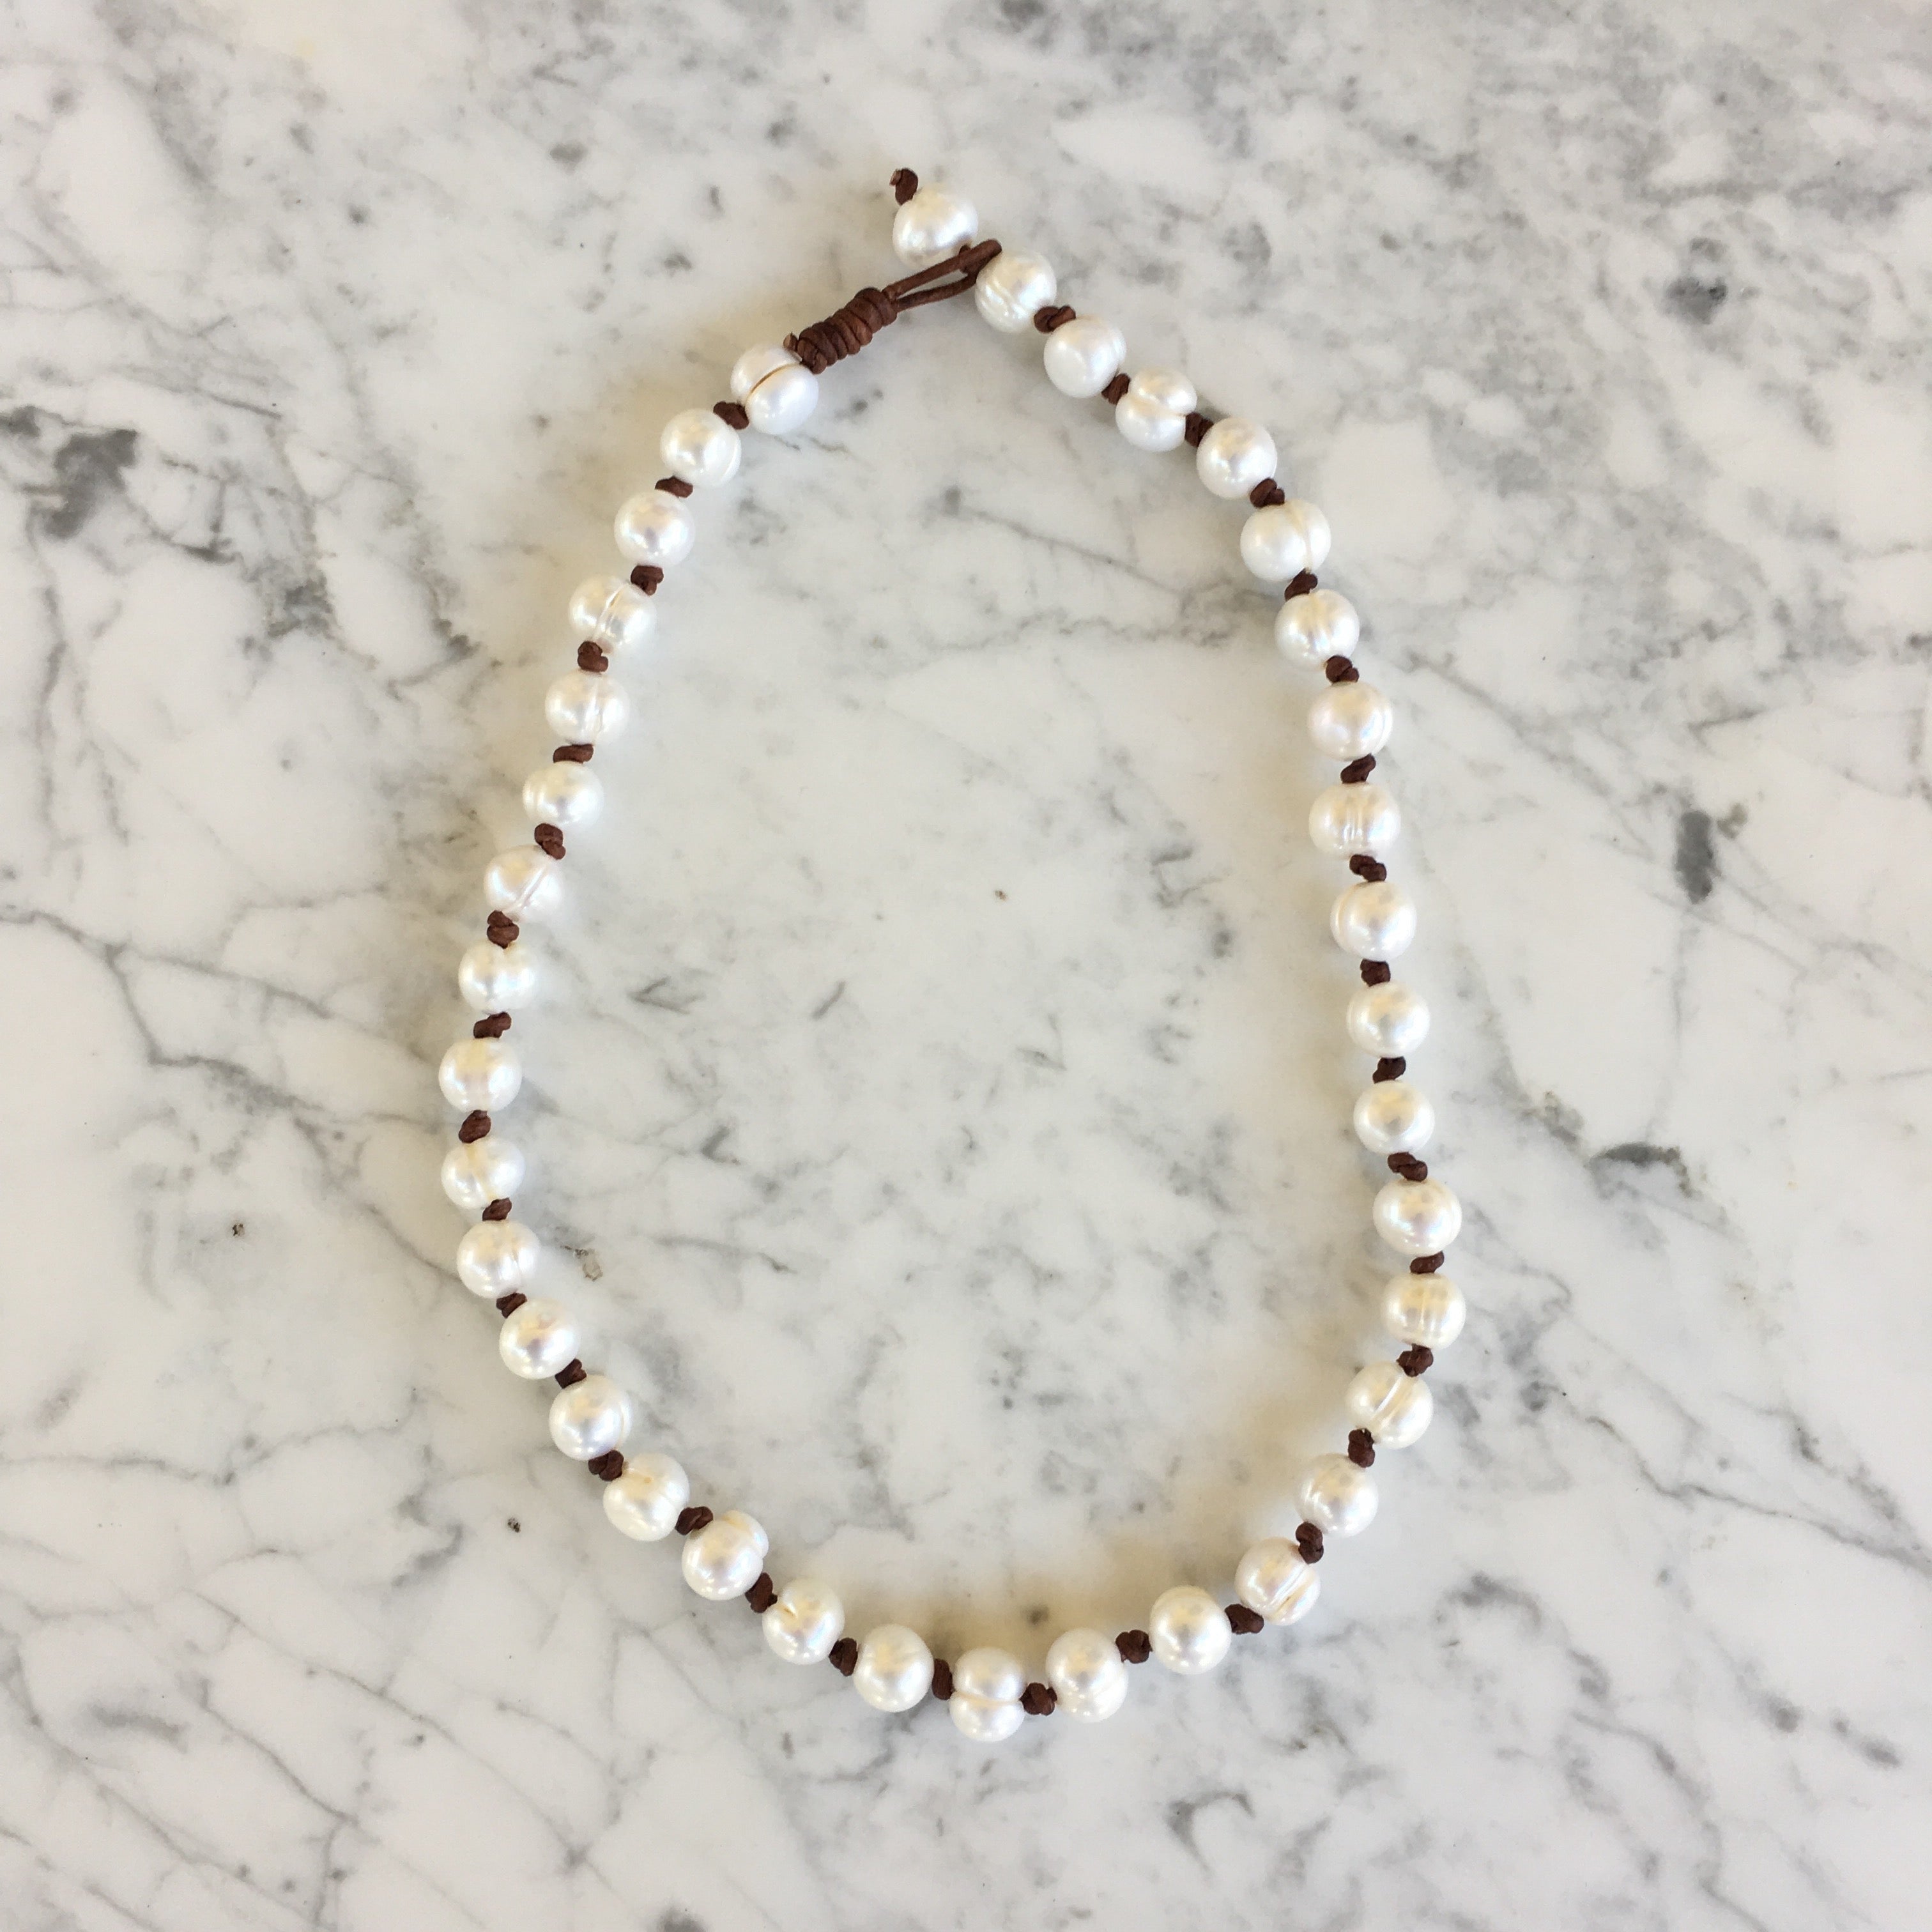 Leather pearl necklace,, 2mm leather cord, Single white pearl choker  necklace, Affordable gift, Free shipping, Organza bag included